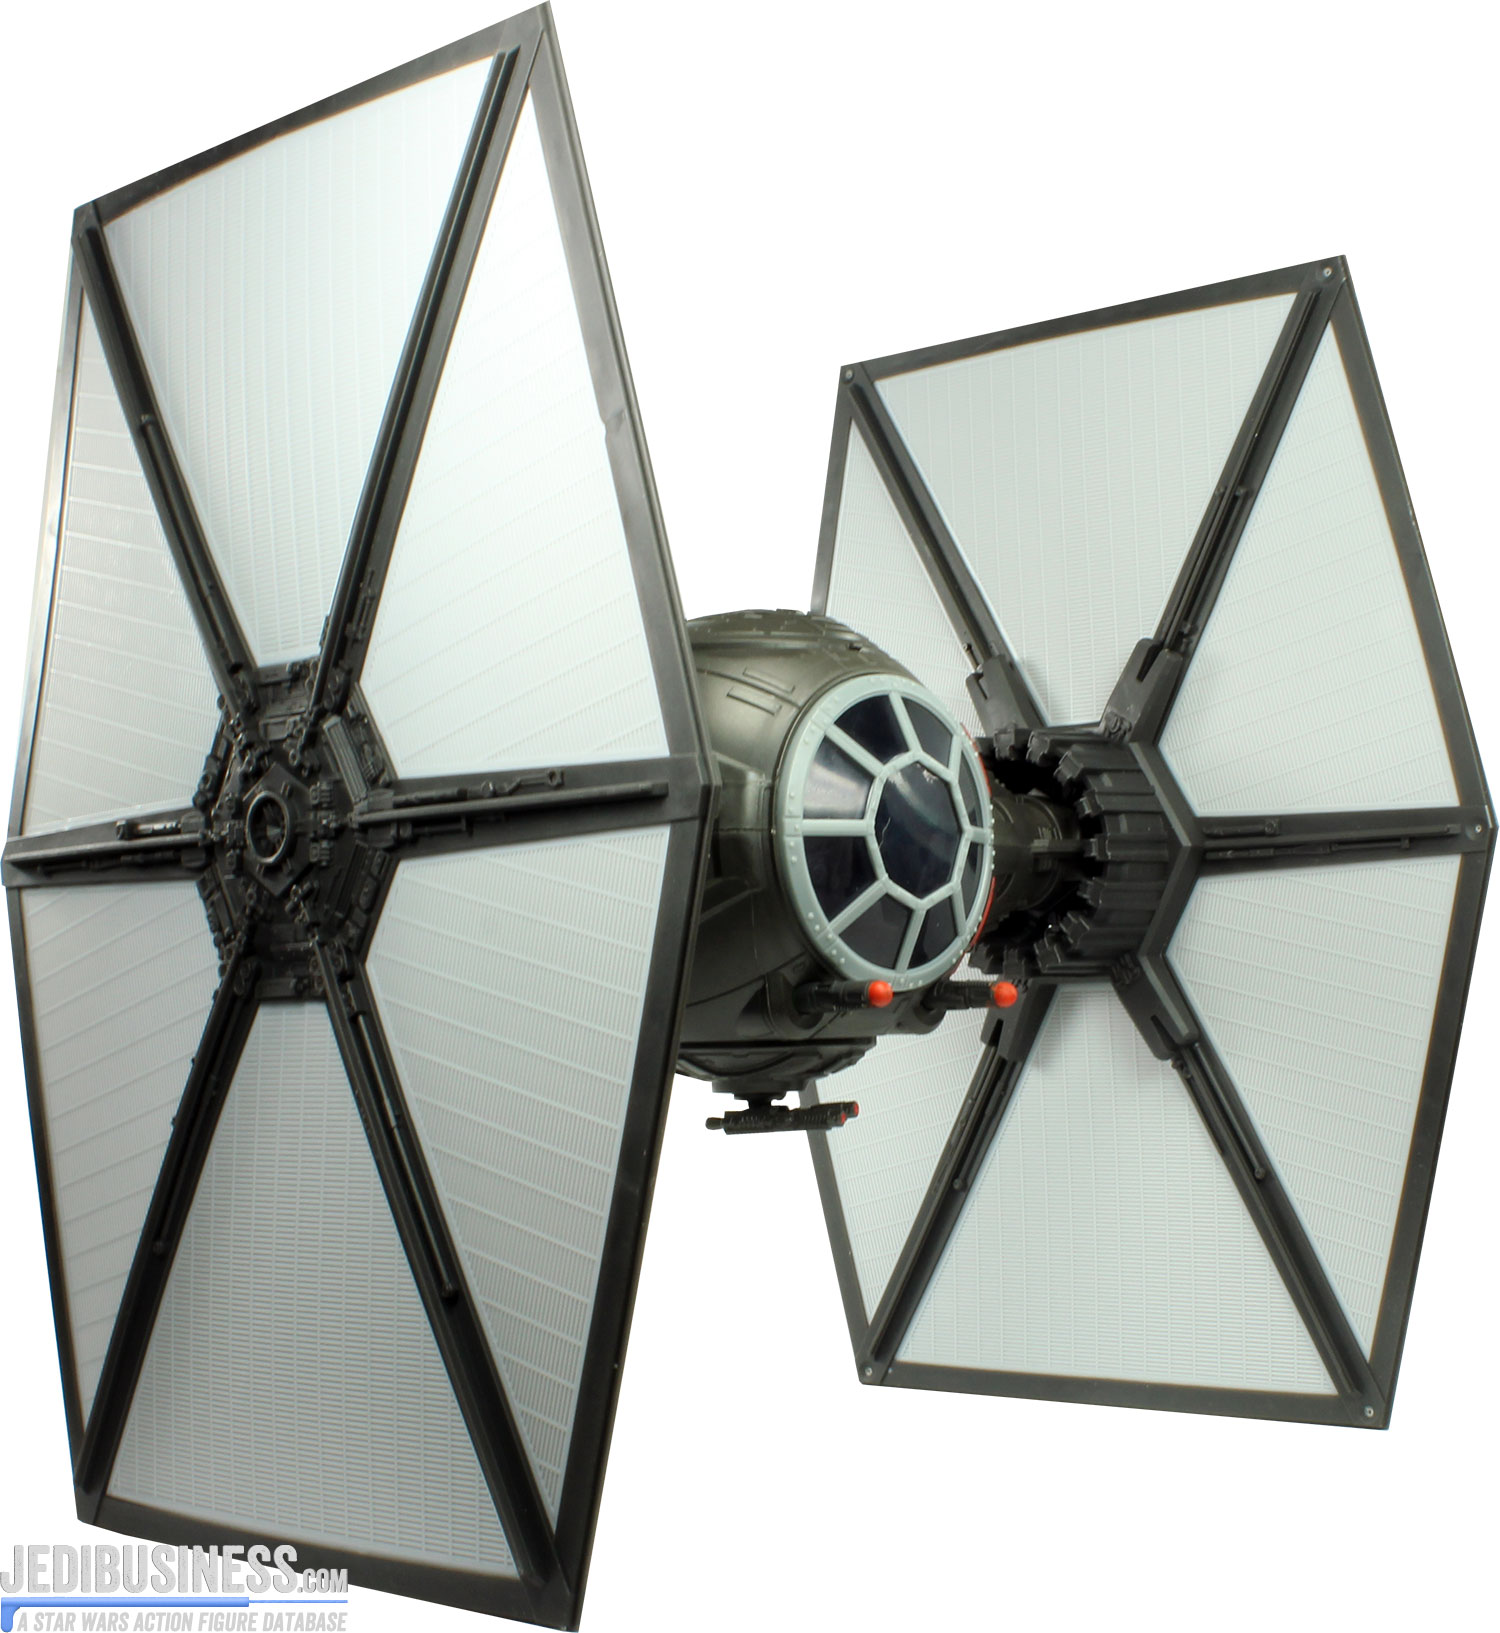 Tie Fighter Pilot With First Order Special Forces Tie Fighter